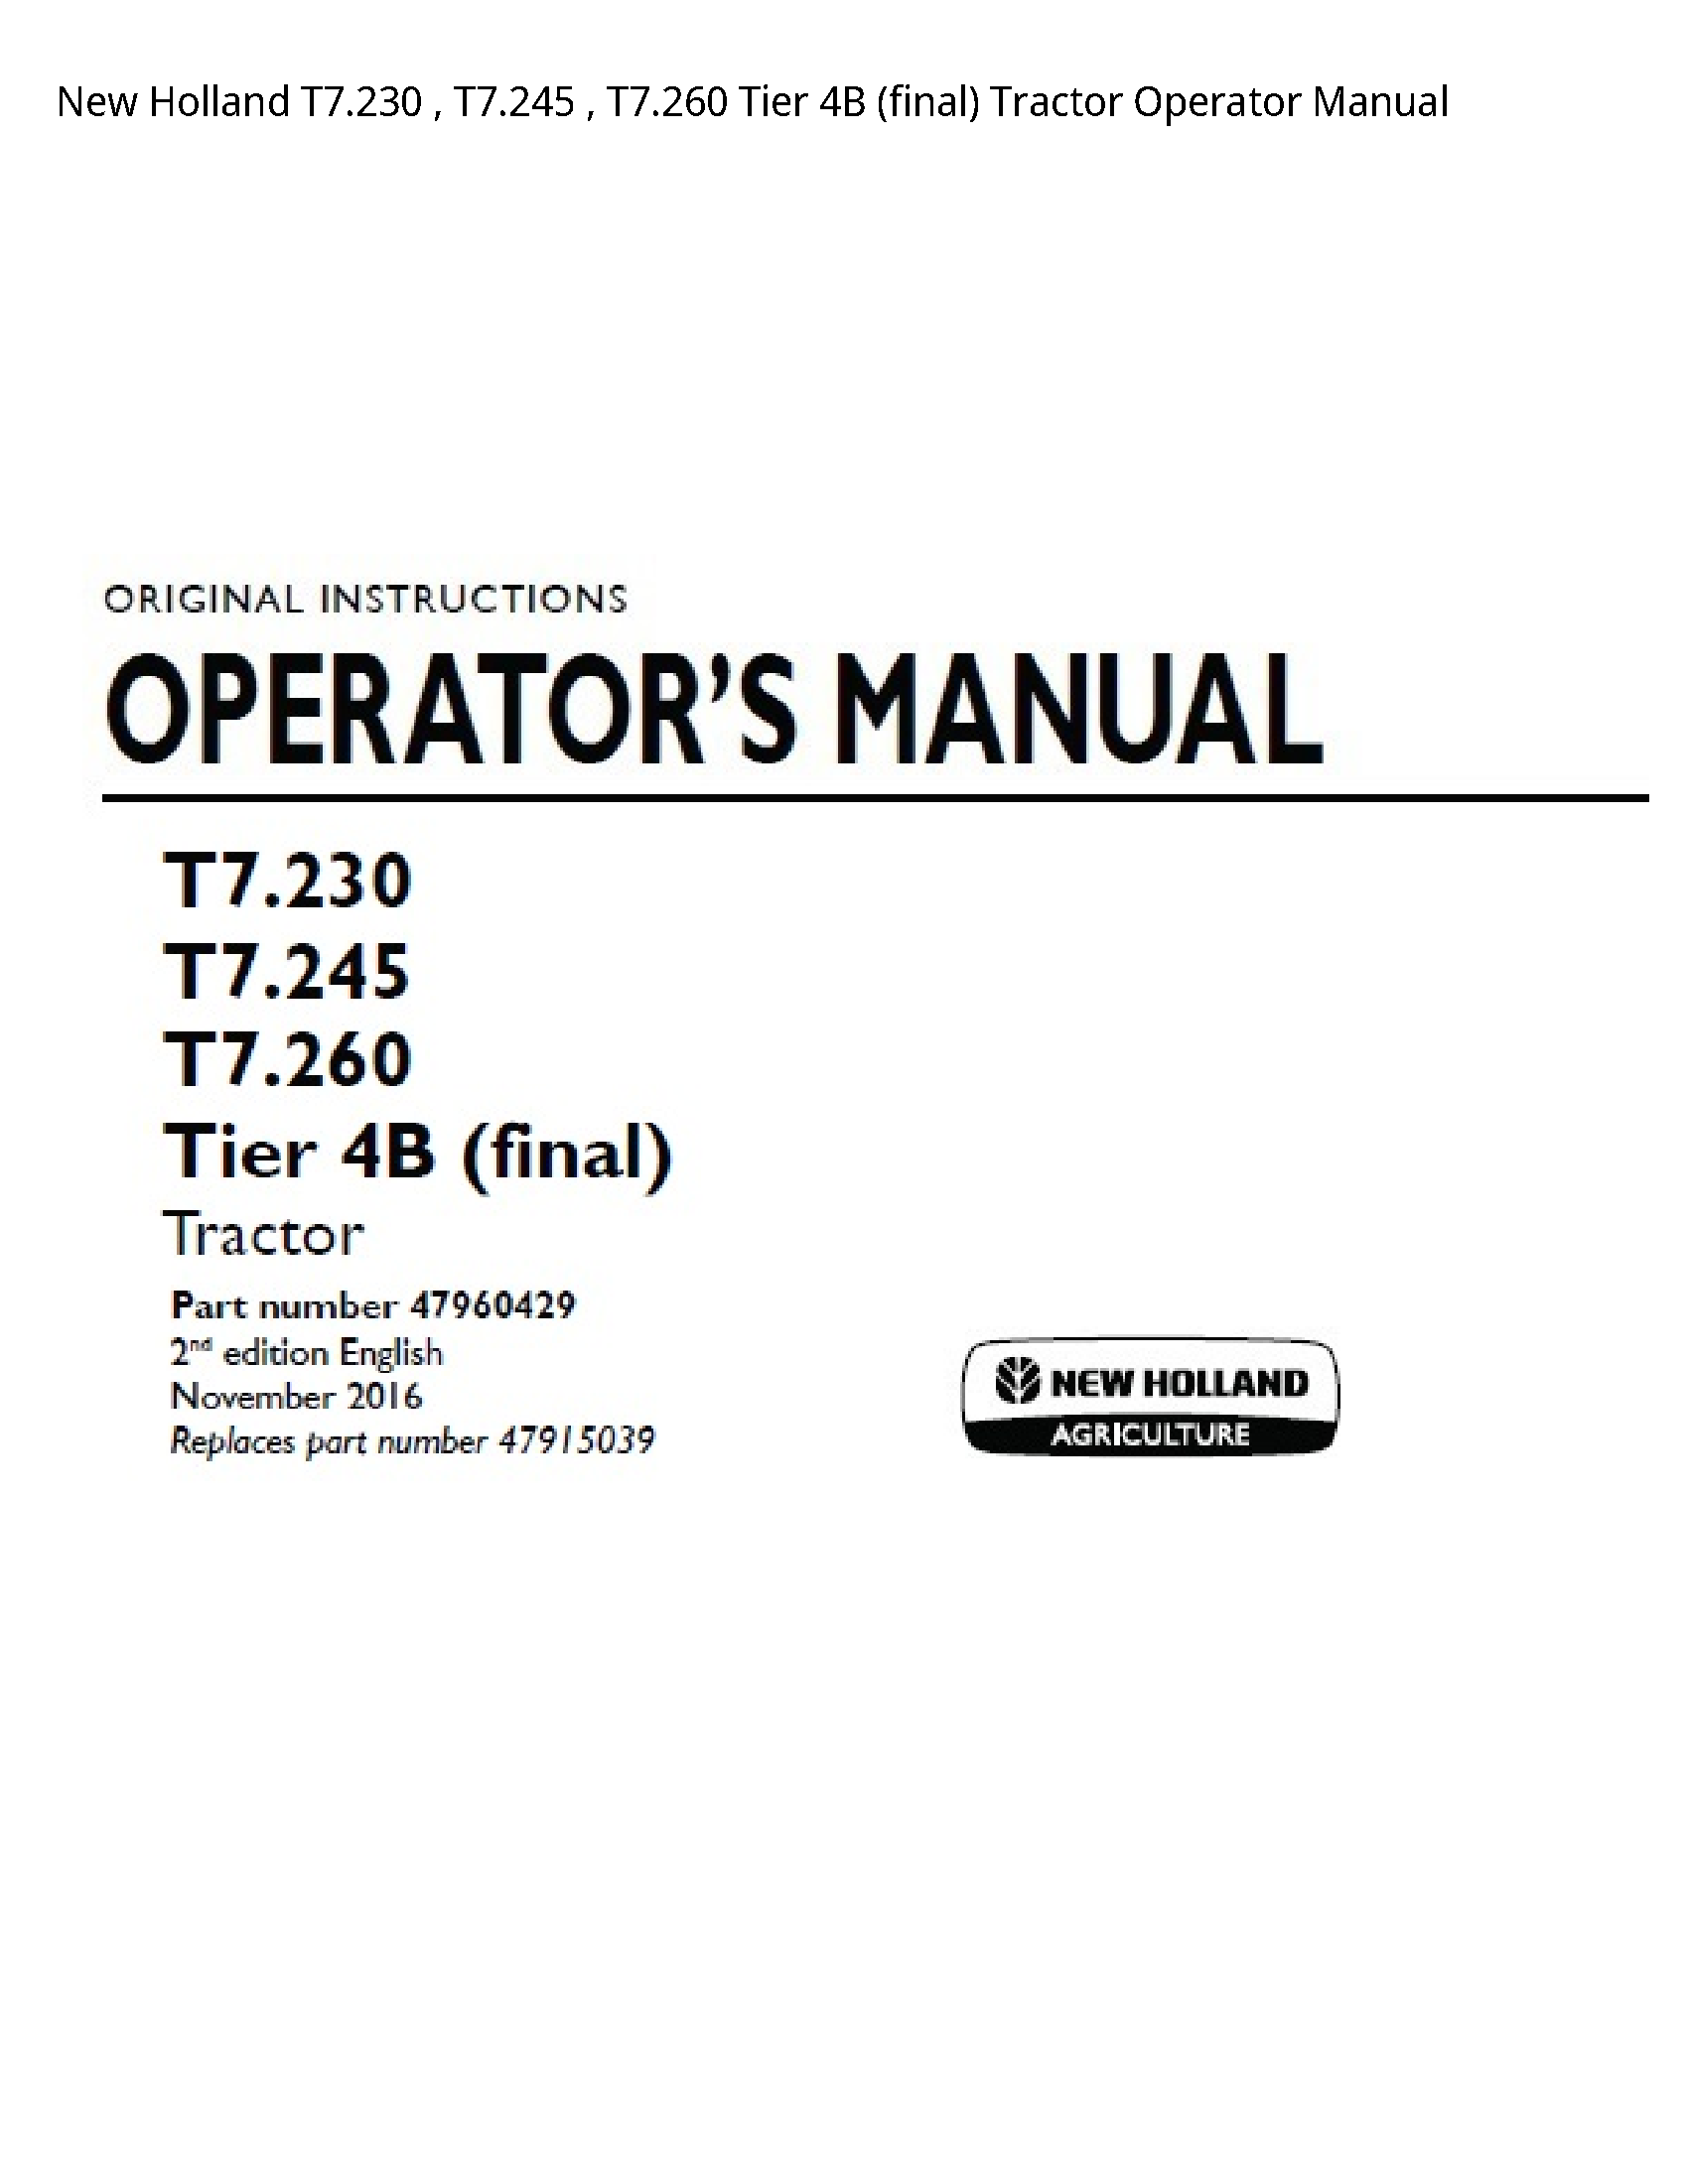 New Holland T7.230 Tier (final) Tractor Operator manual